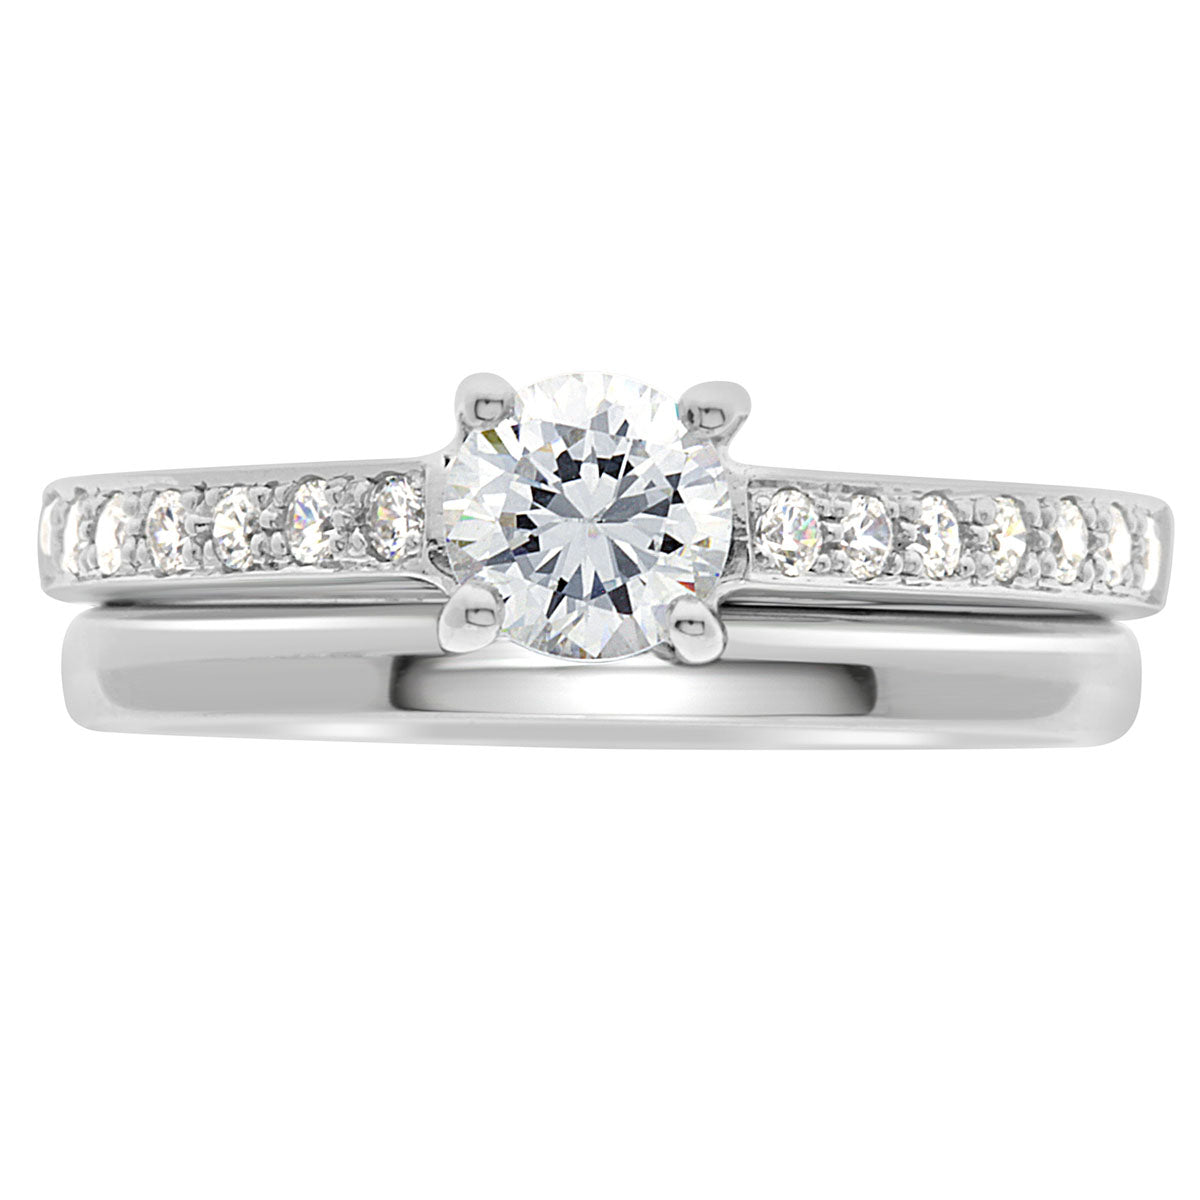 Princess Cut Bezel Ring set in white gold pictured with a plain wedding ring